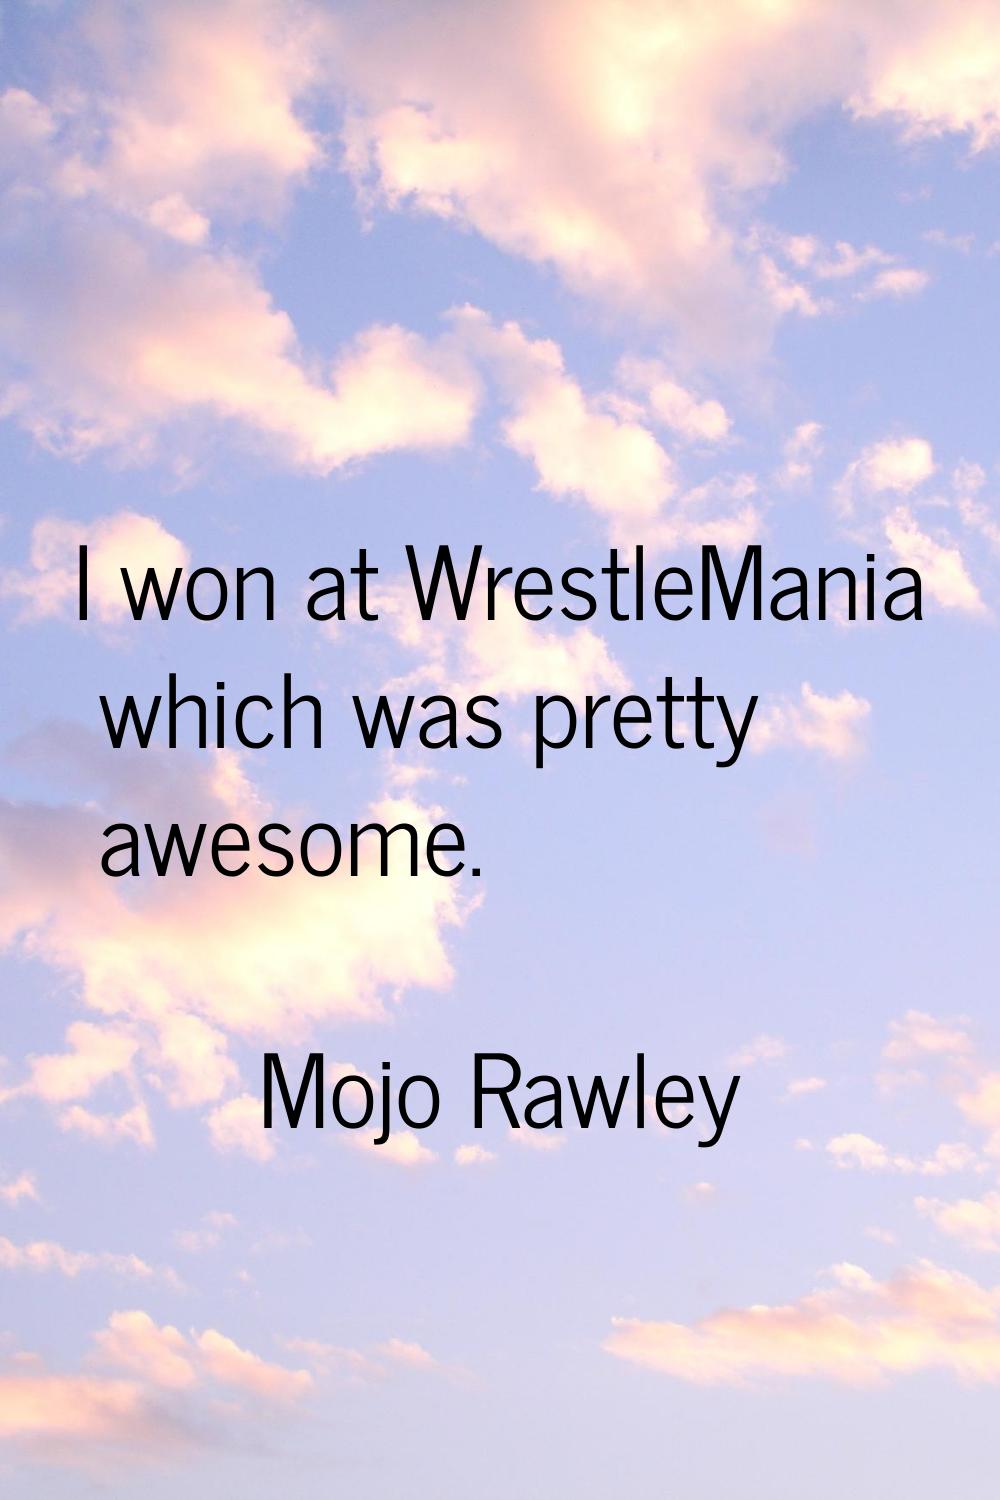 I won at WrestleMania which was pretty awesome.